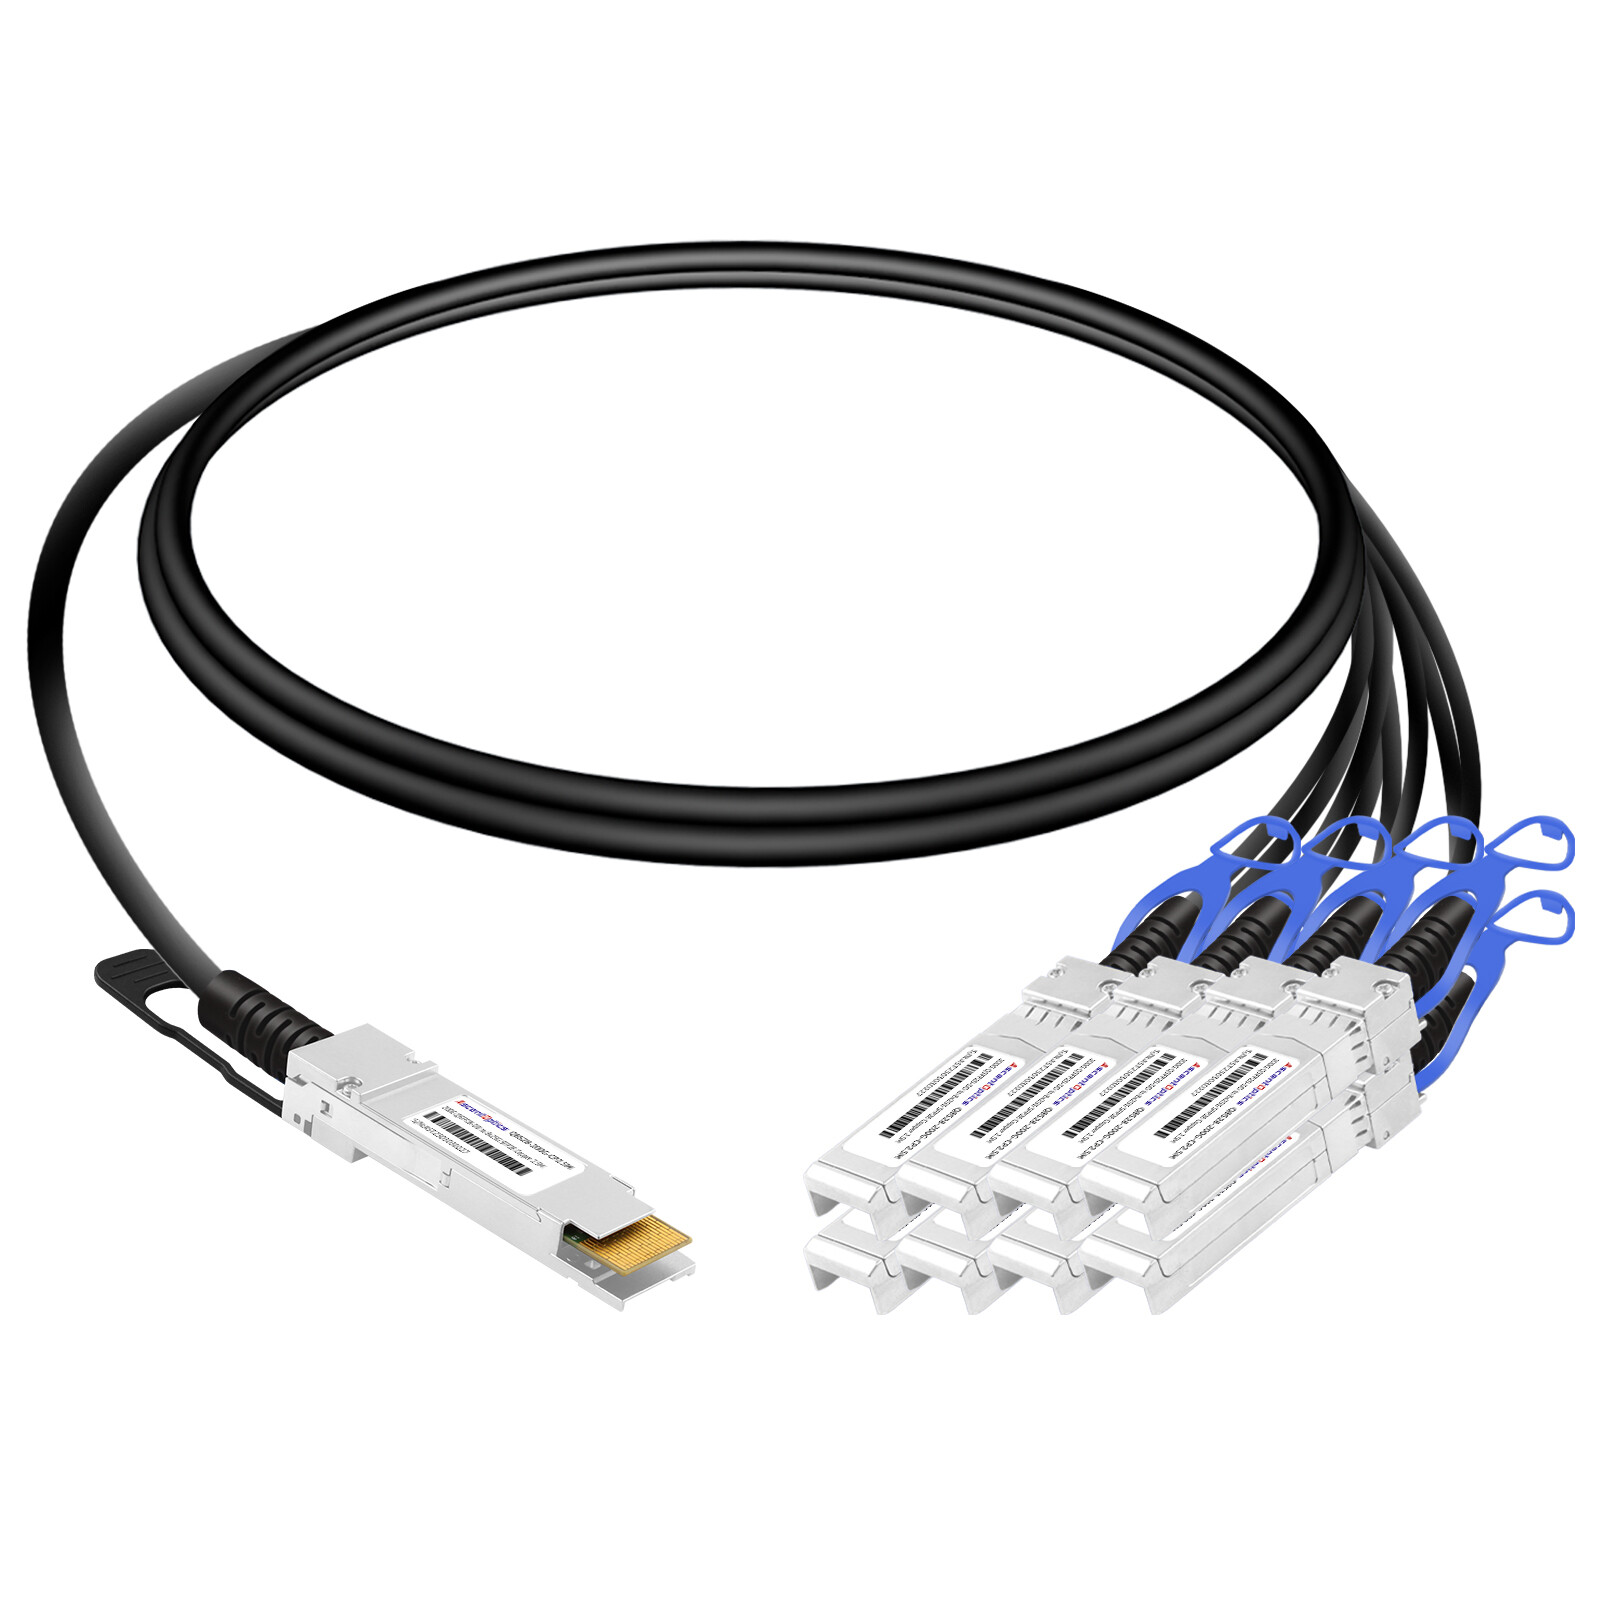 200G QSFP28-DD to 8x 25G SFP28 Copper Breakout Cable,2.5 Meters,Passive